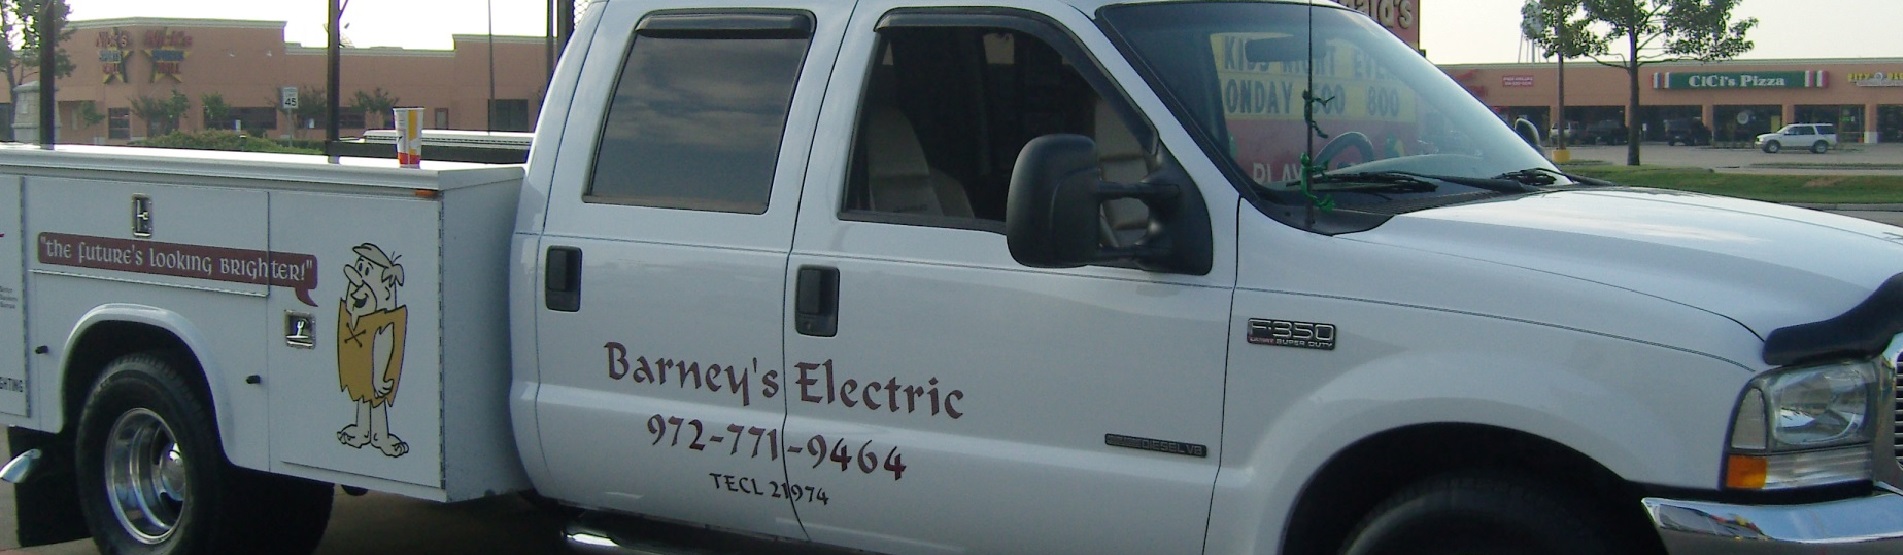 Electrician Josephine TX Barney's Electric Full Service Electrician Residential Commercial Retail and New Construction Wiring Repair Installation Service 24 Hour Emergency Services Master Electrician Rockwall Texas